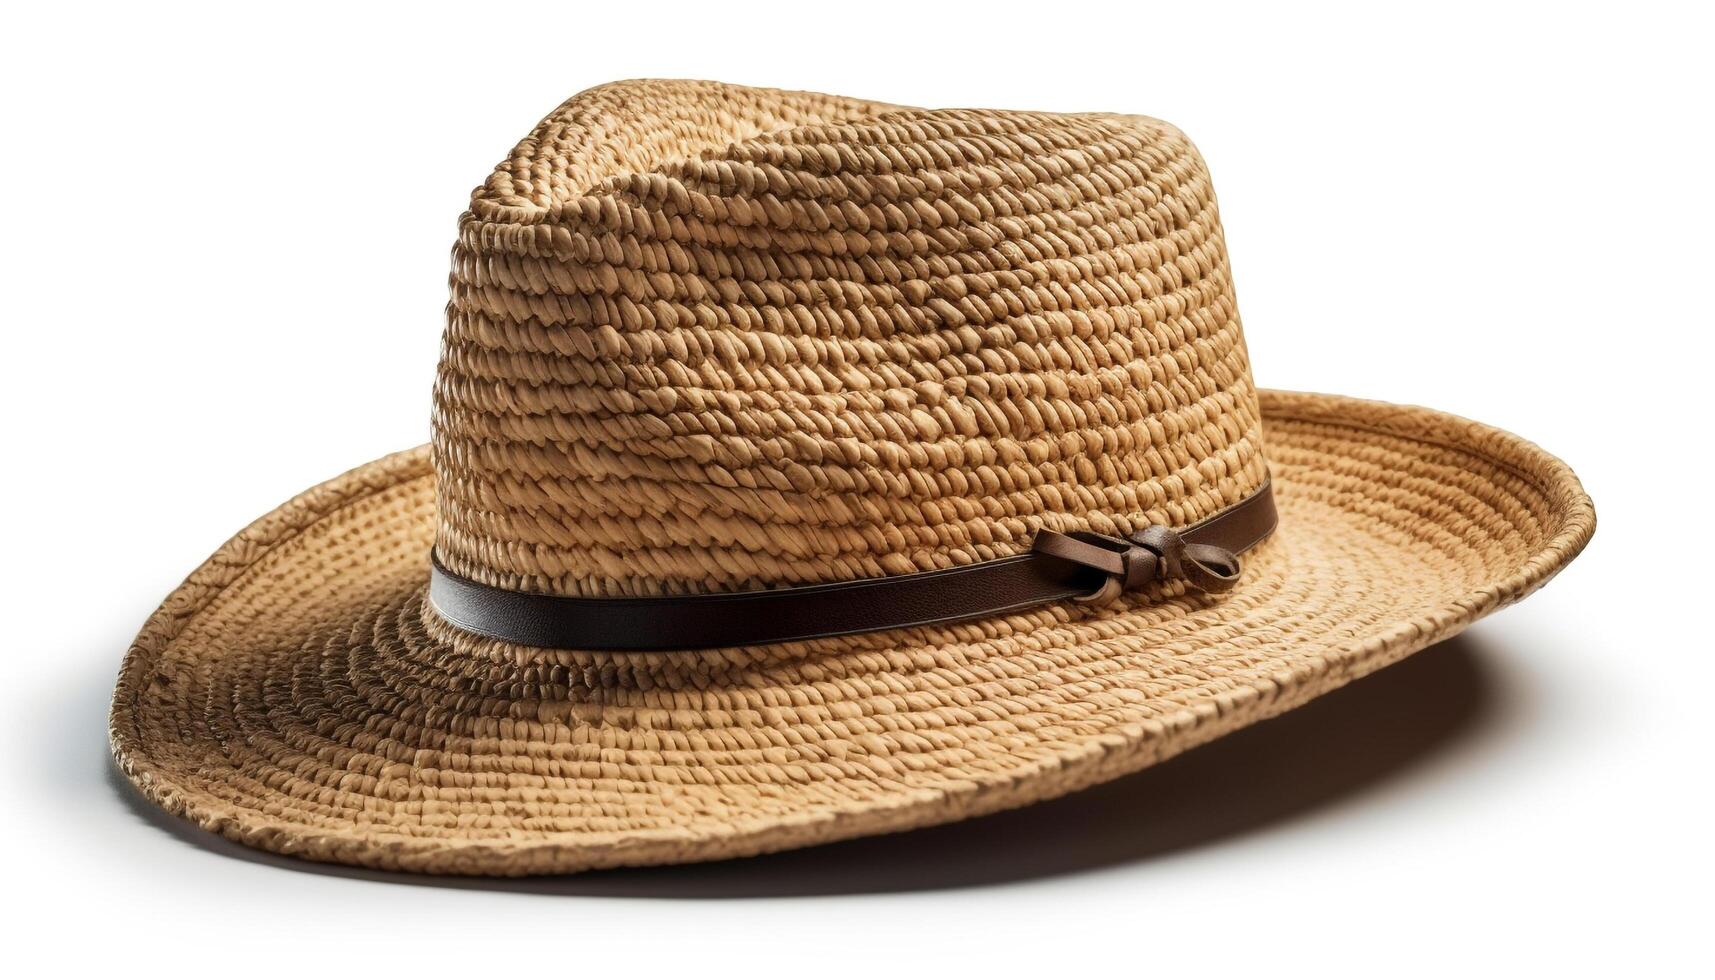 Straw hat, fedora, and bowler combine fashionably generated by AI photo